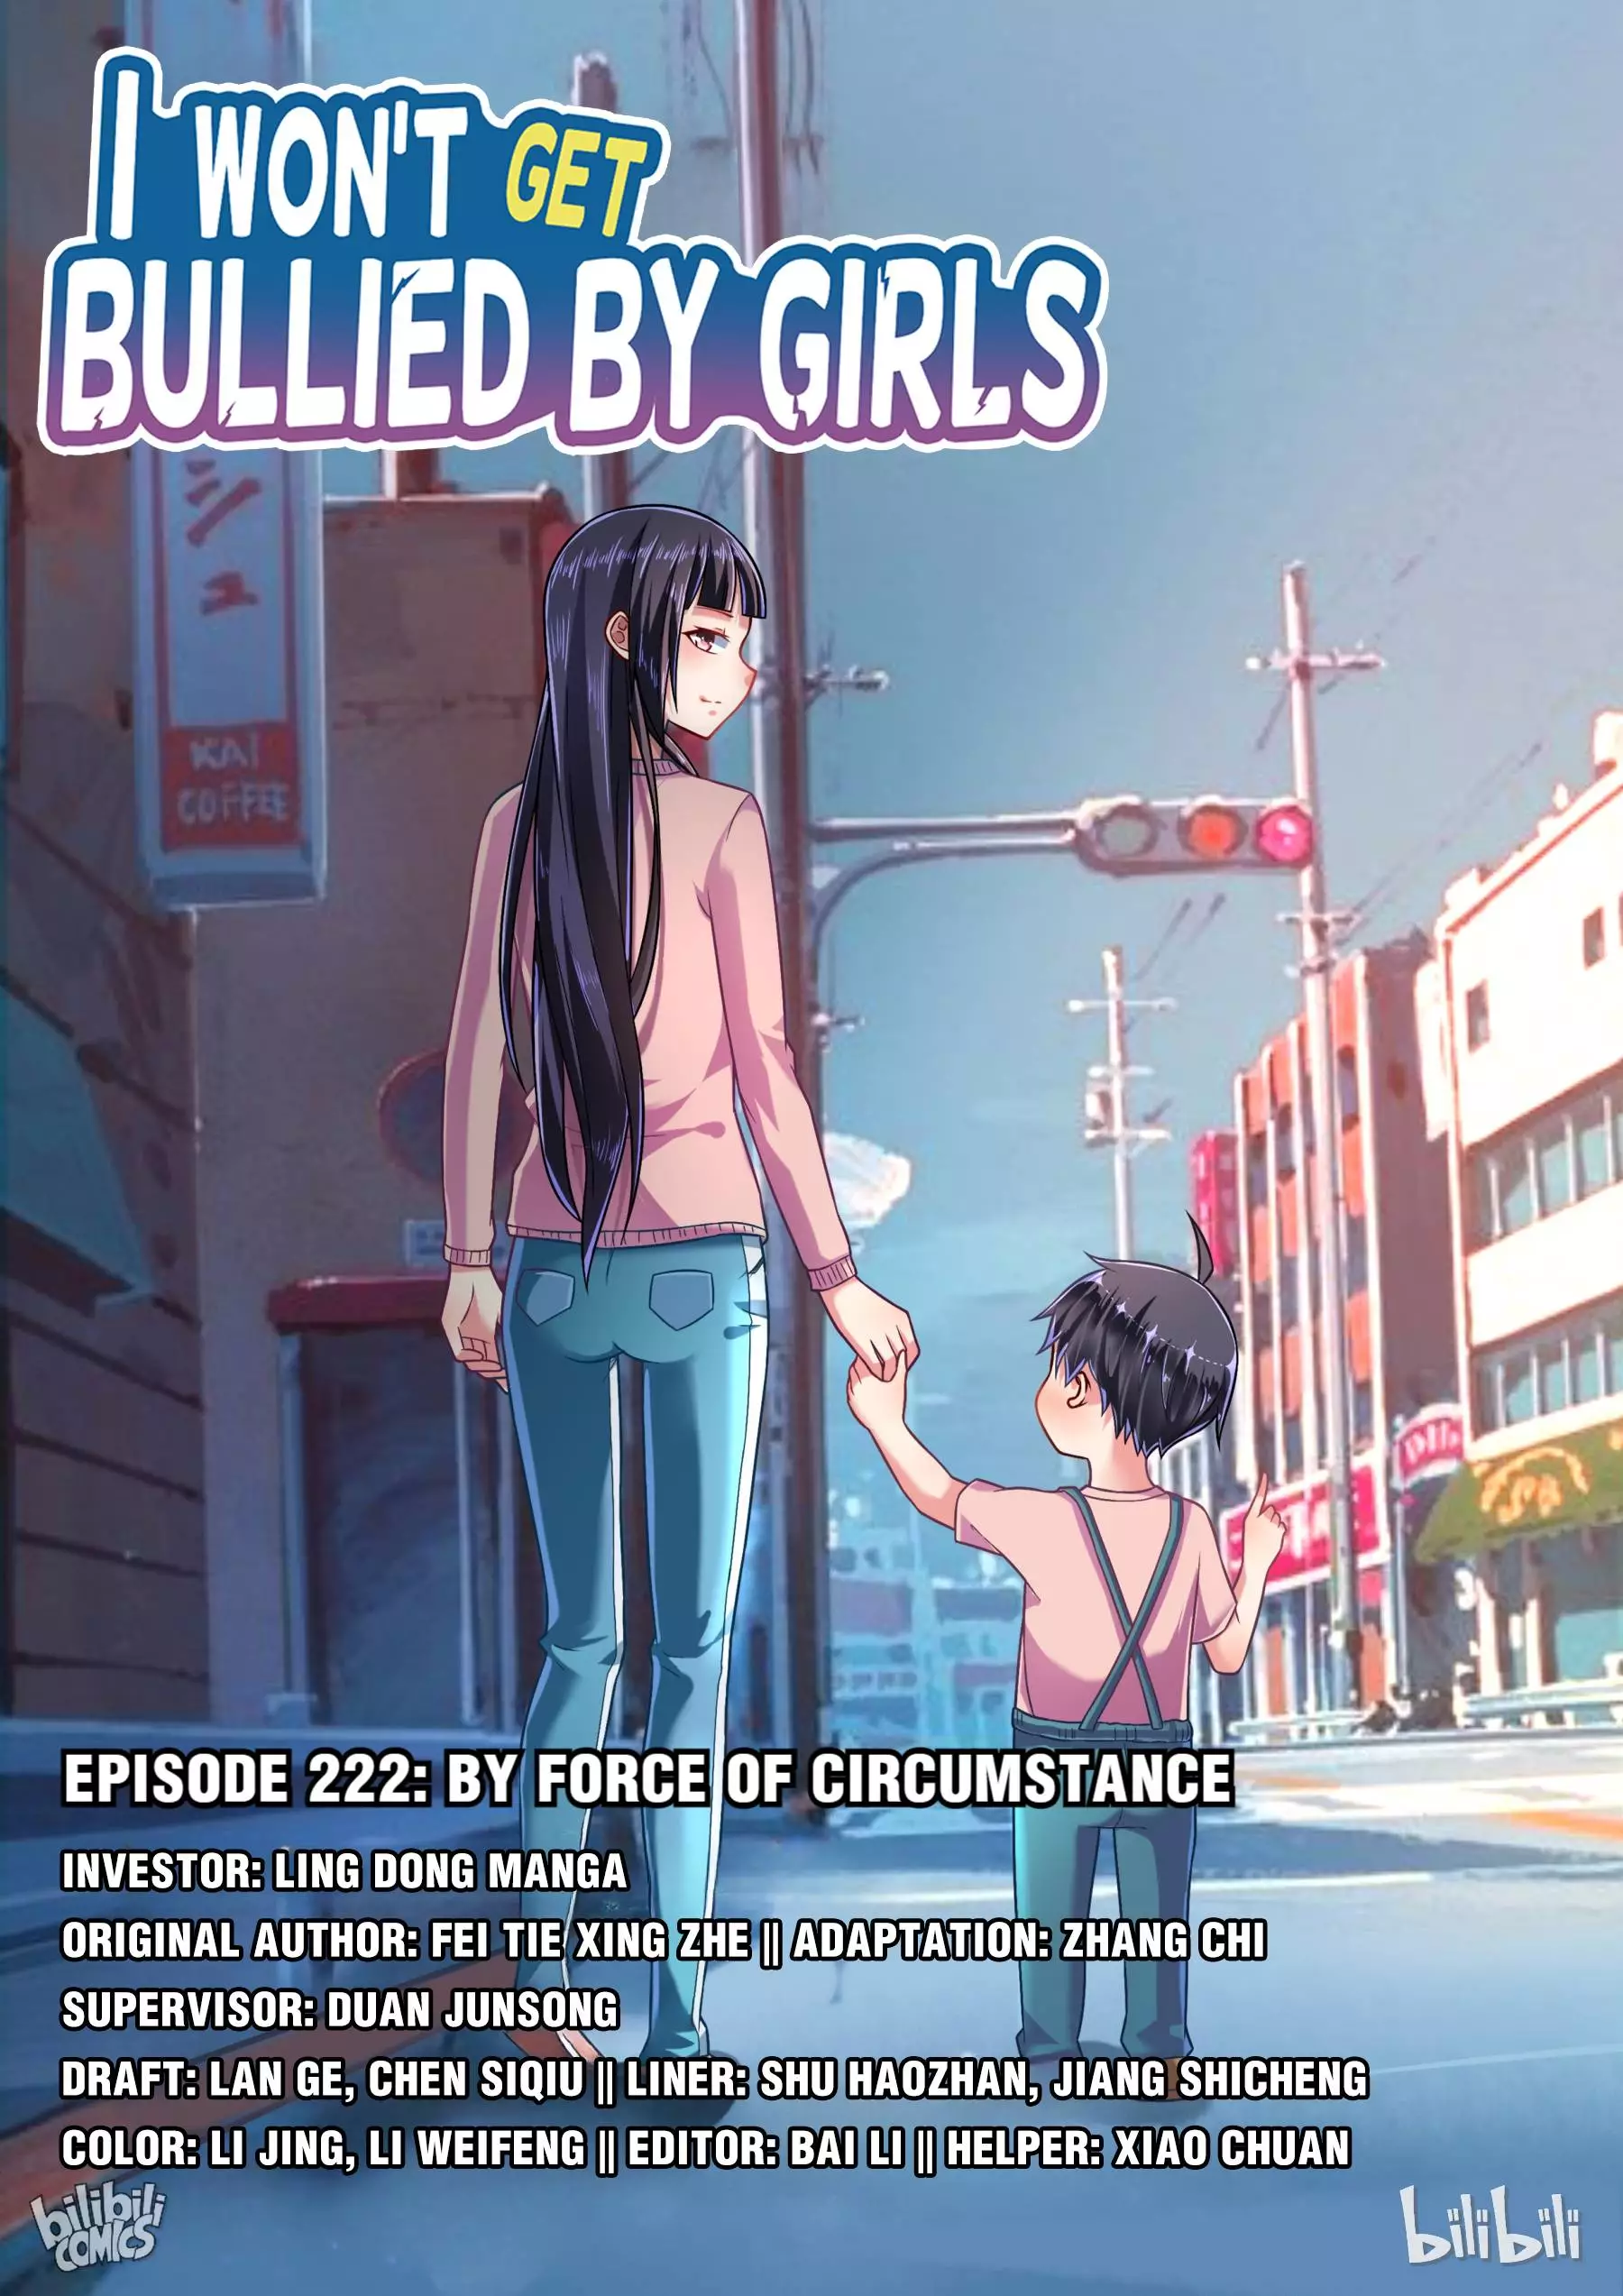 I Don't Want To Be Bullied By Girls - 222 page 1-f17ade34